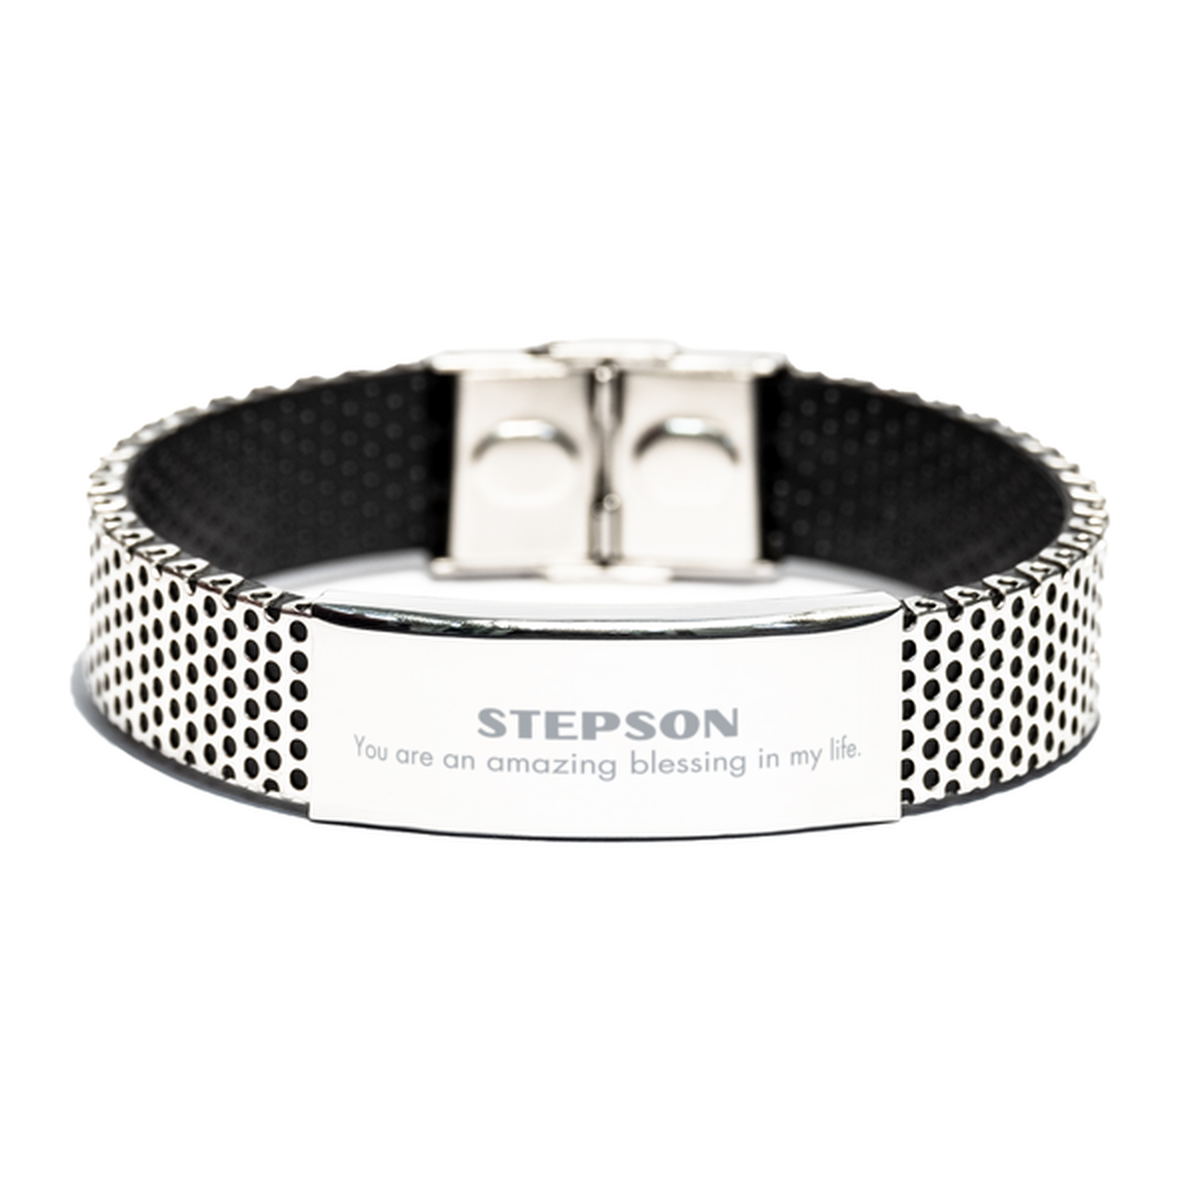 Stepson Stainless Steel Bracelet, You are an amazing blessing in my life, Thank You Gifts For Stepson, Inspirational Birthday Christmas Unique Gifts For Stepson